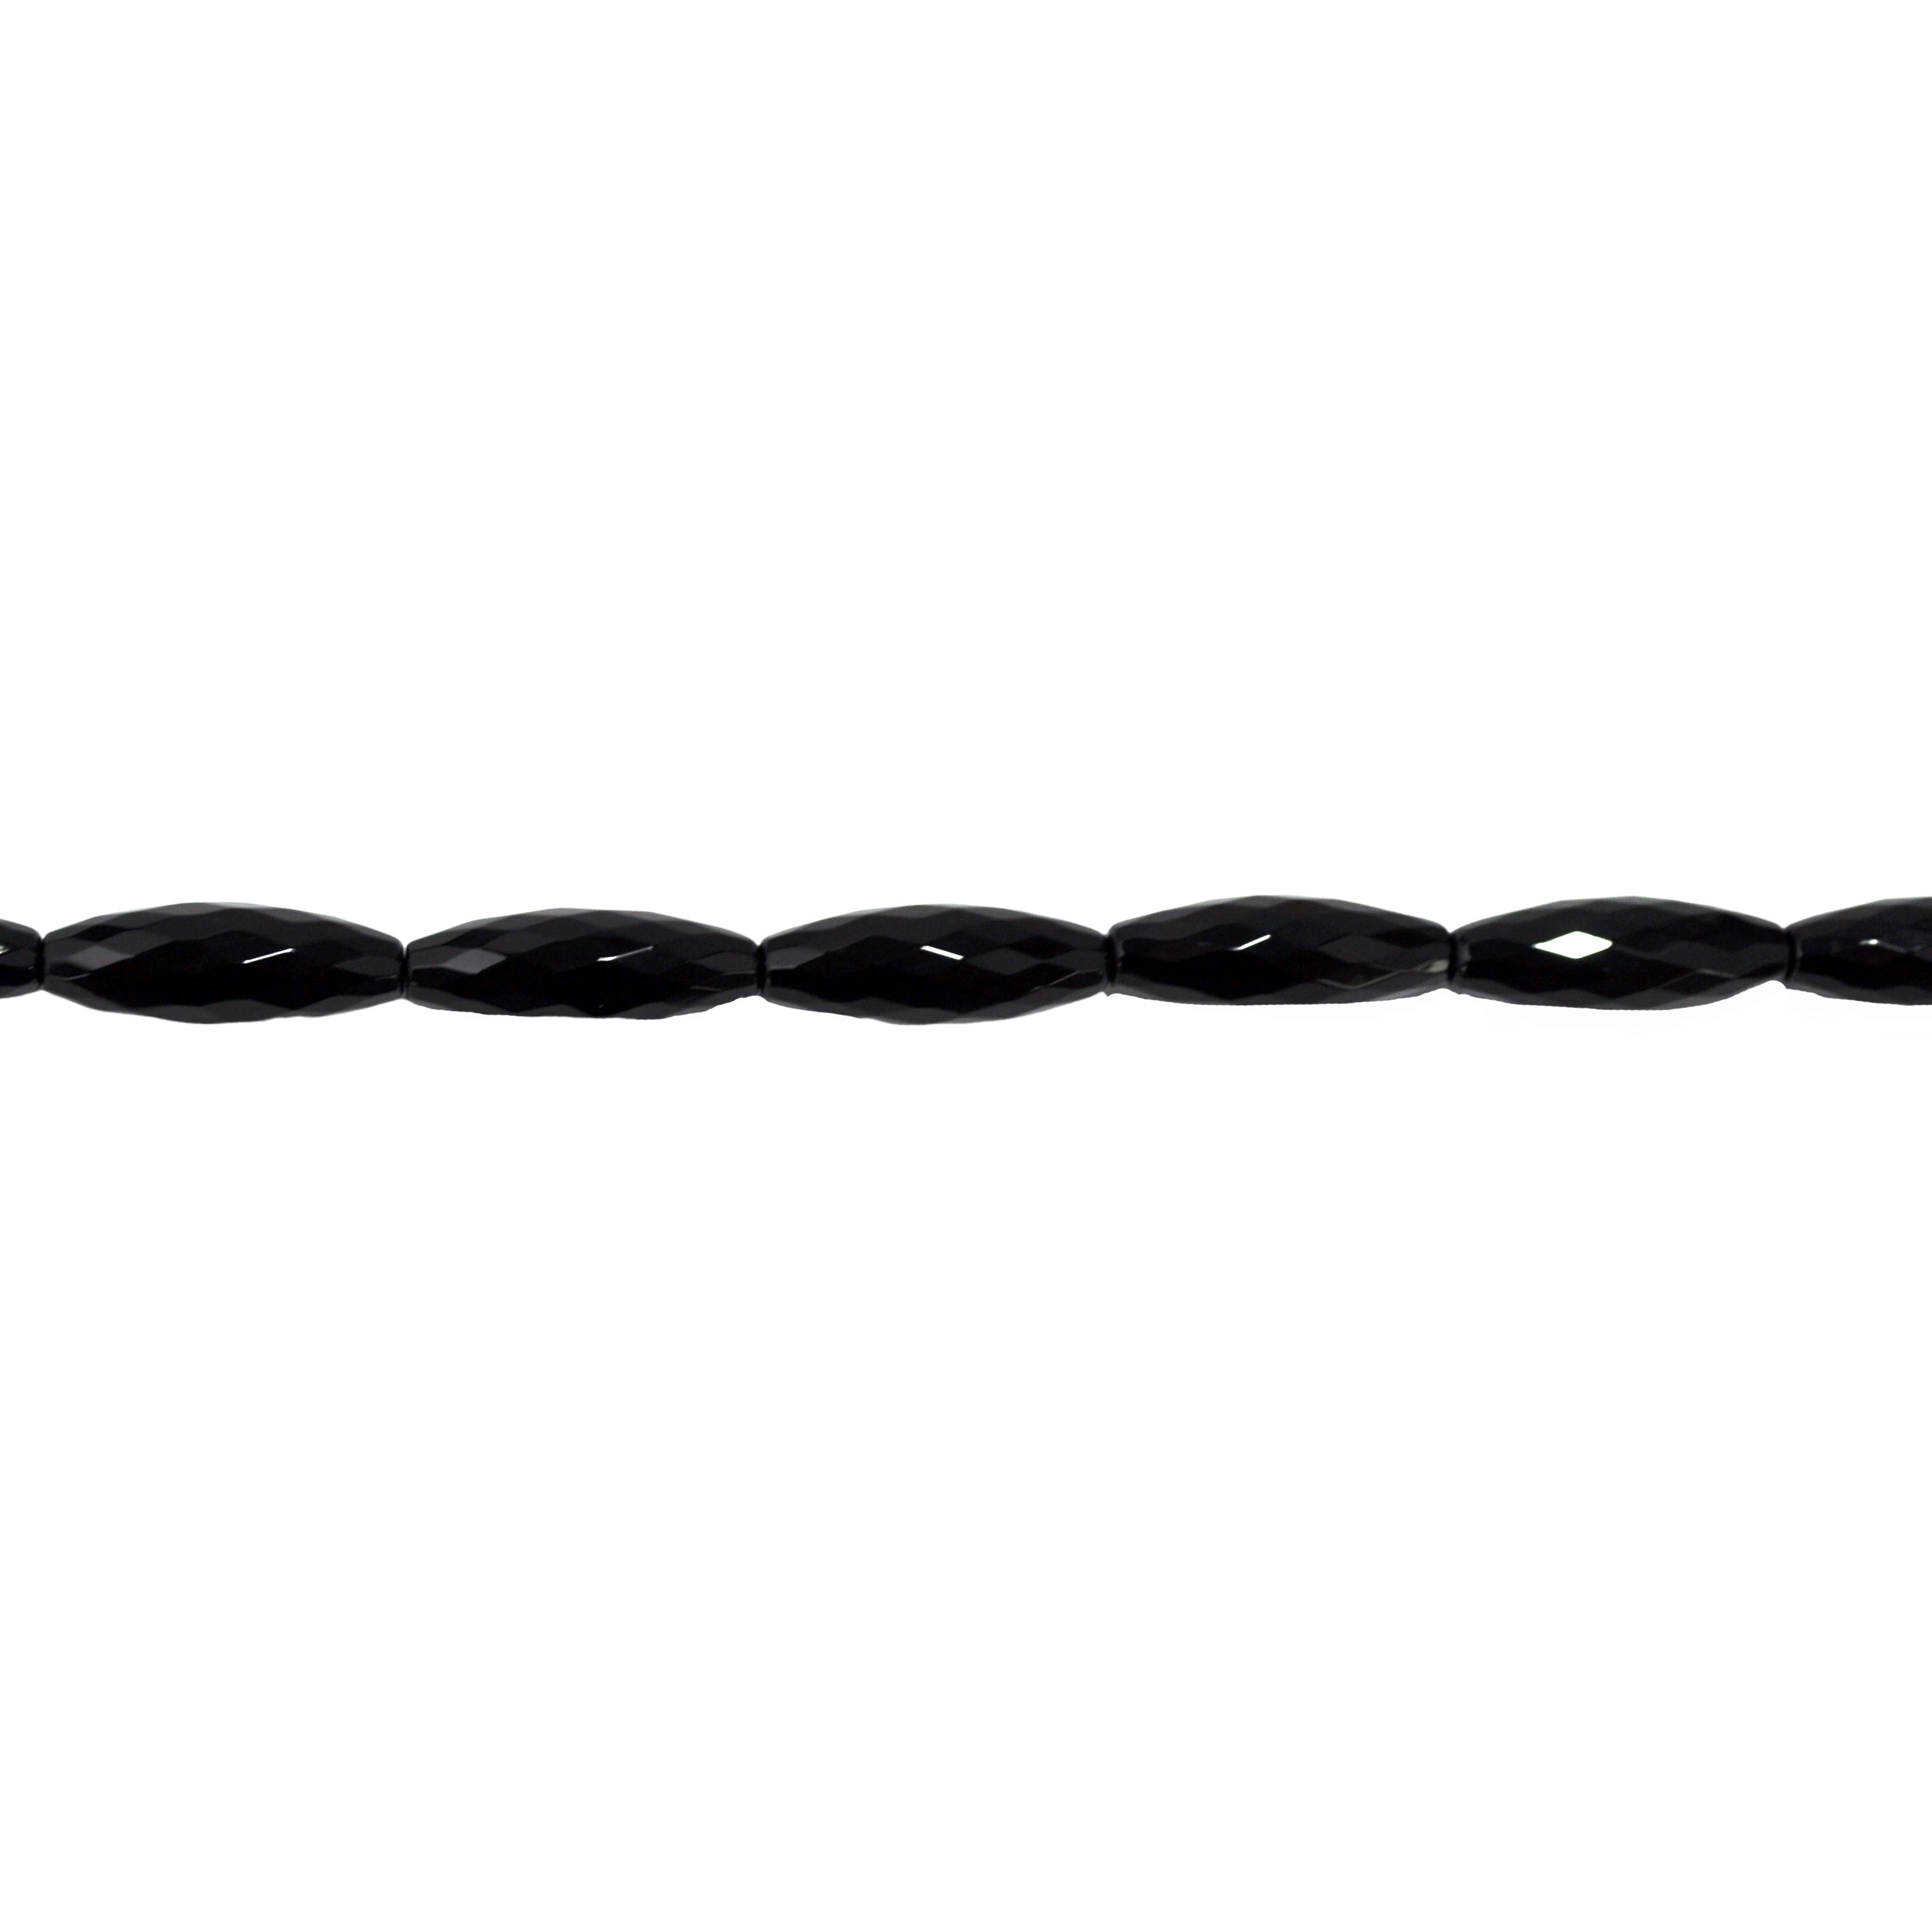 10 x 30mm Black Onyx Faceted Rice Bead